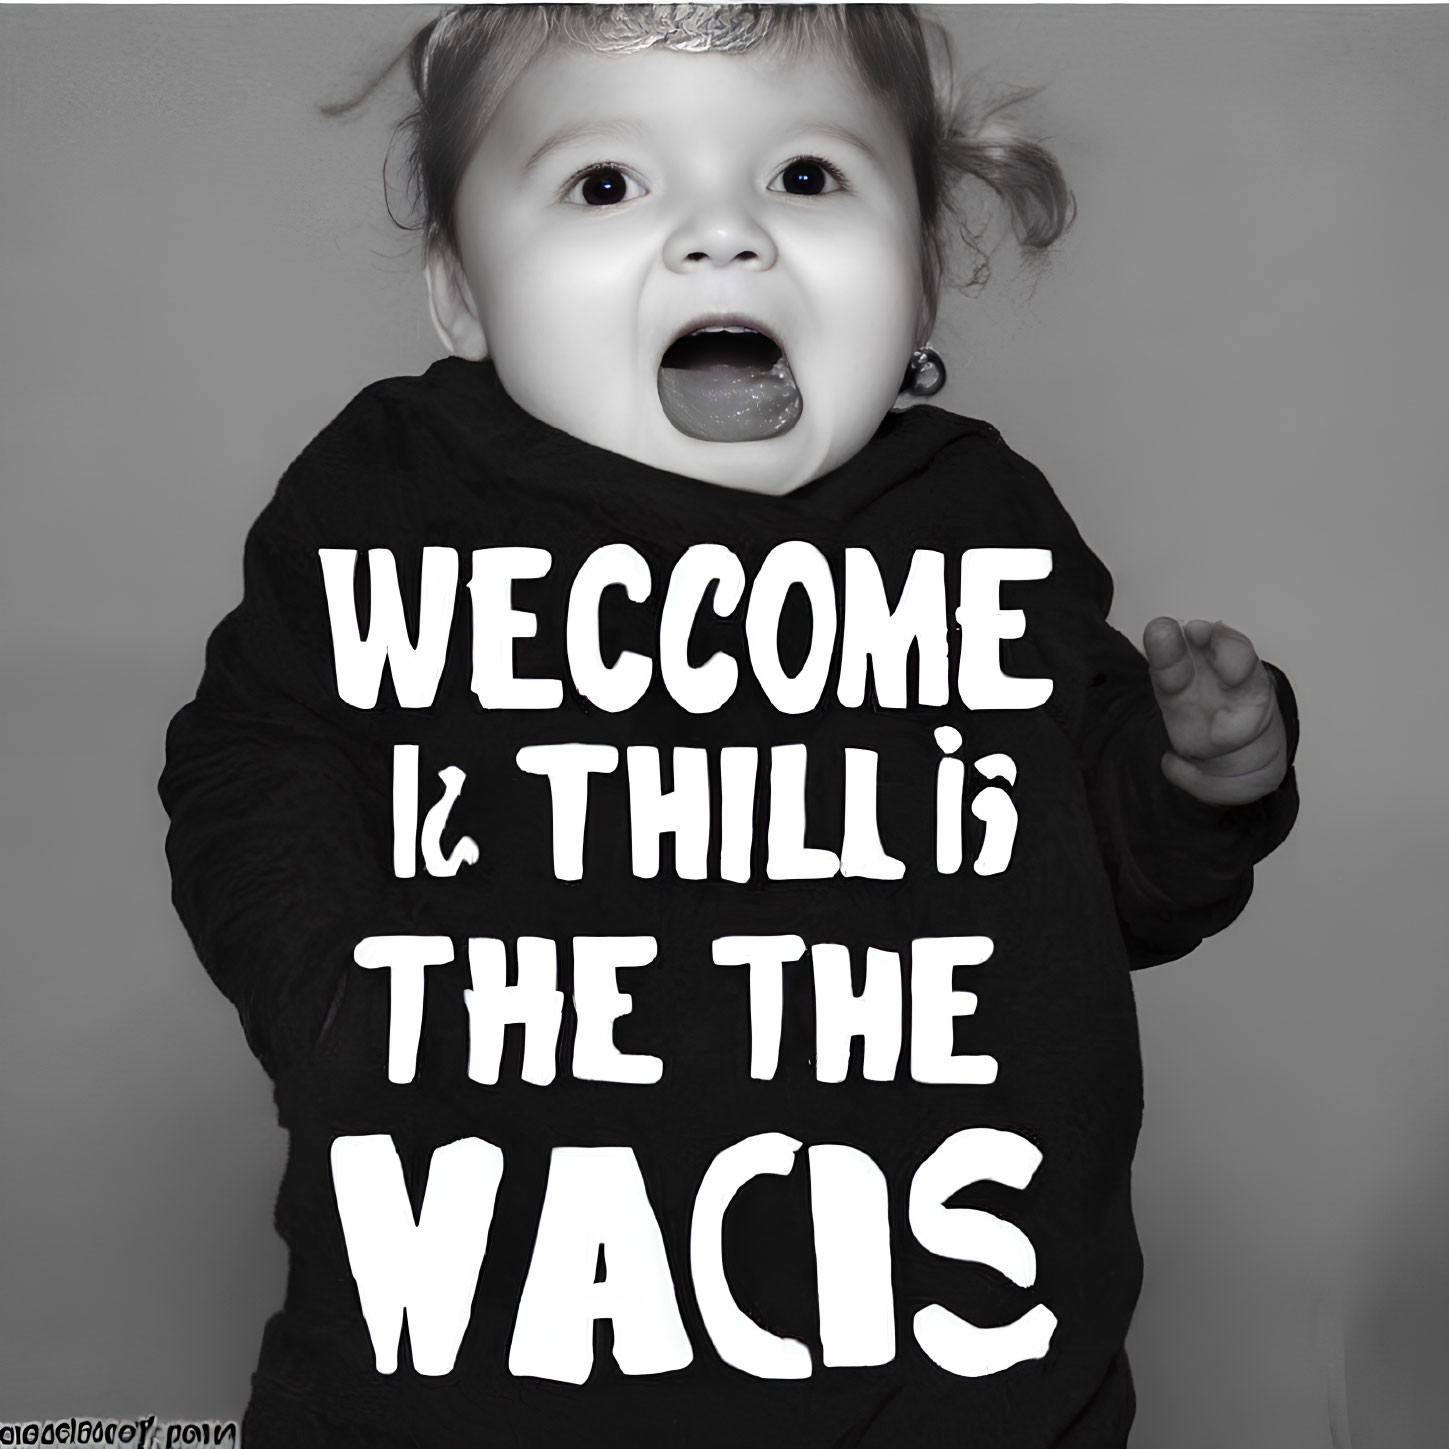 Monochrome baby photo in onesie with vaccine-themed text and headband